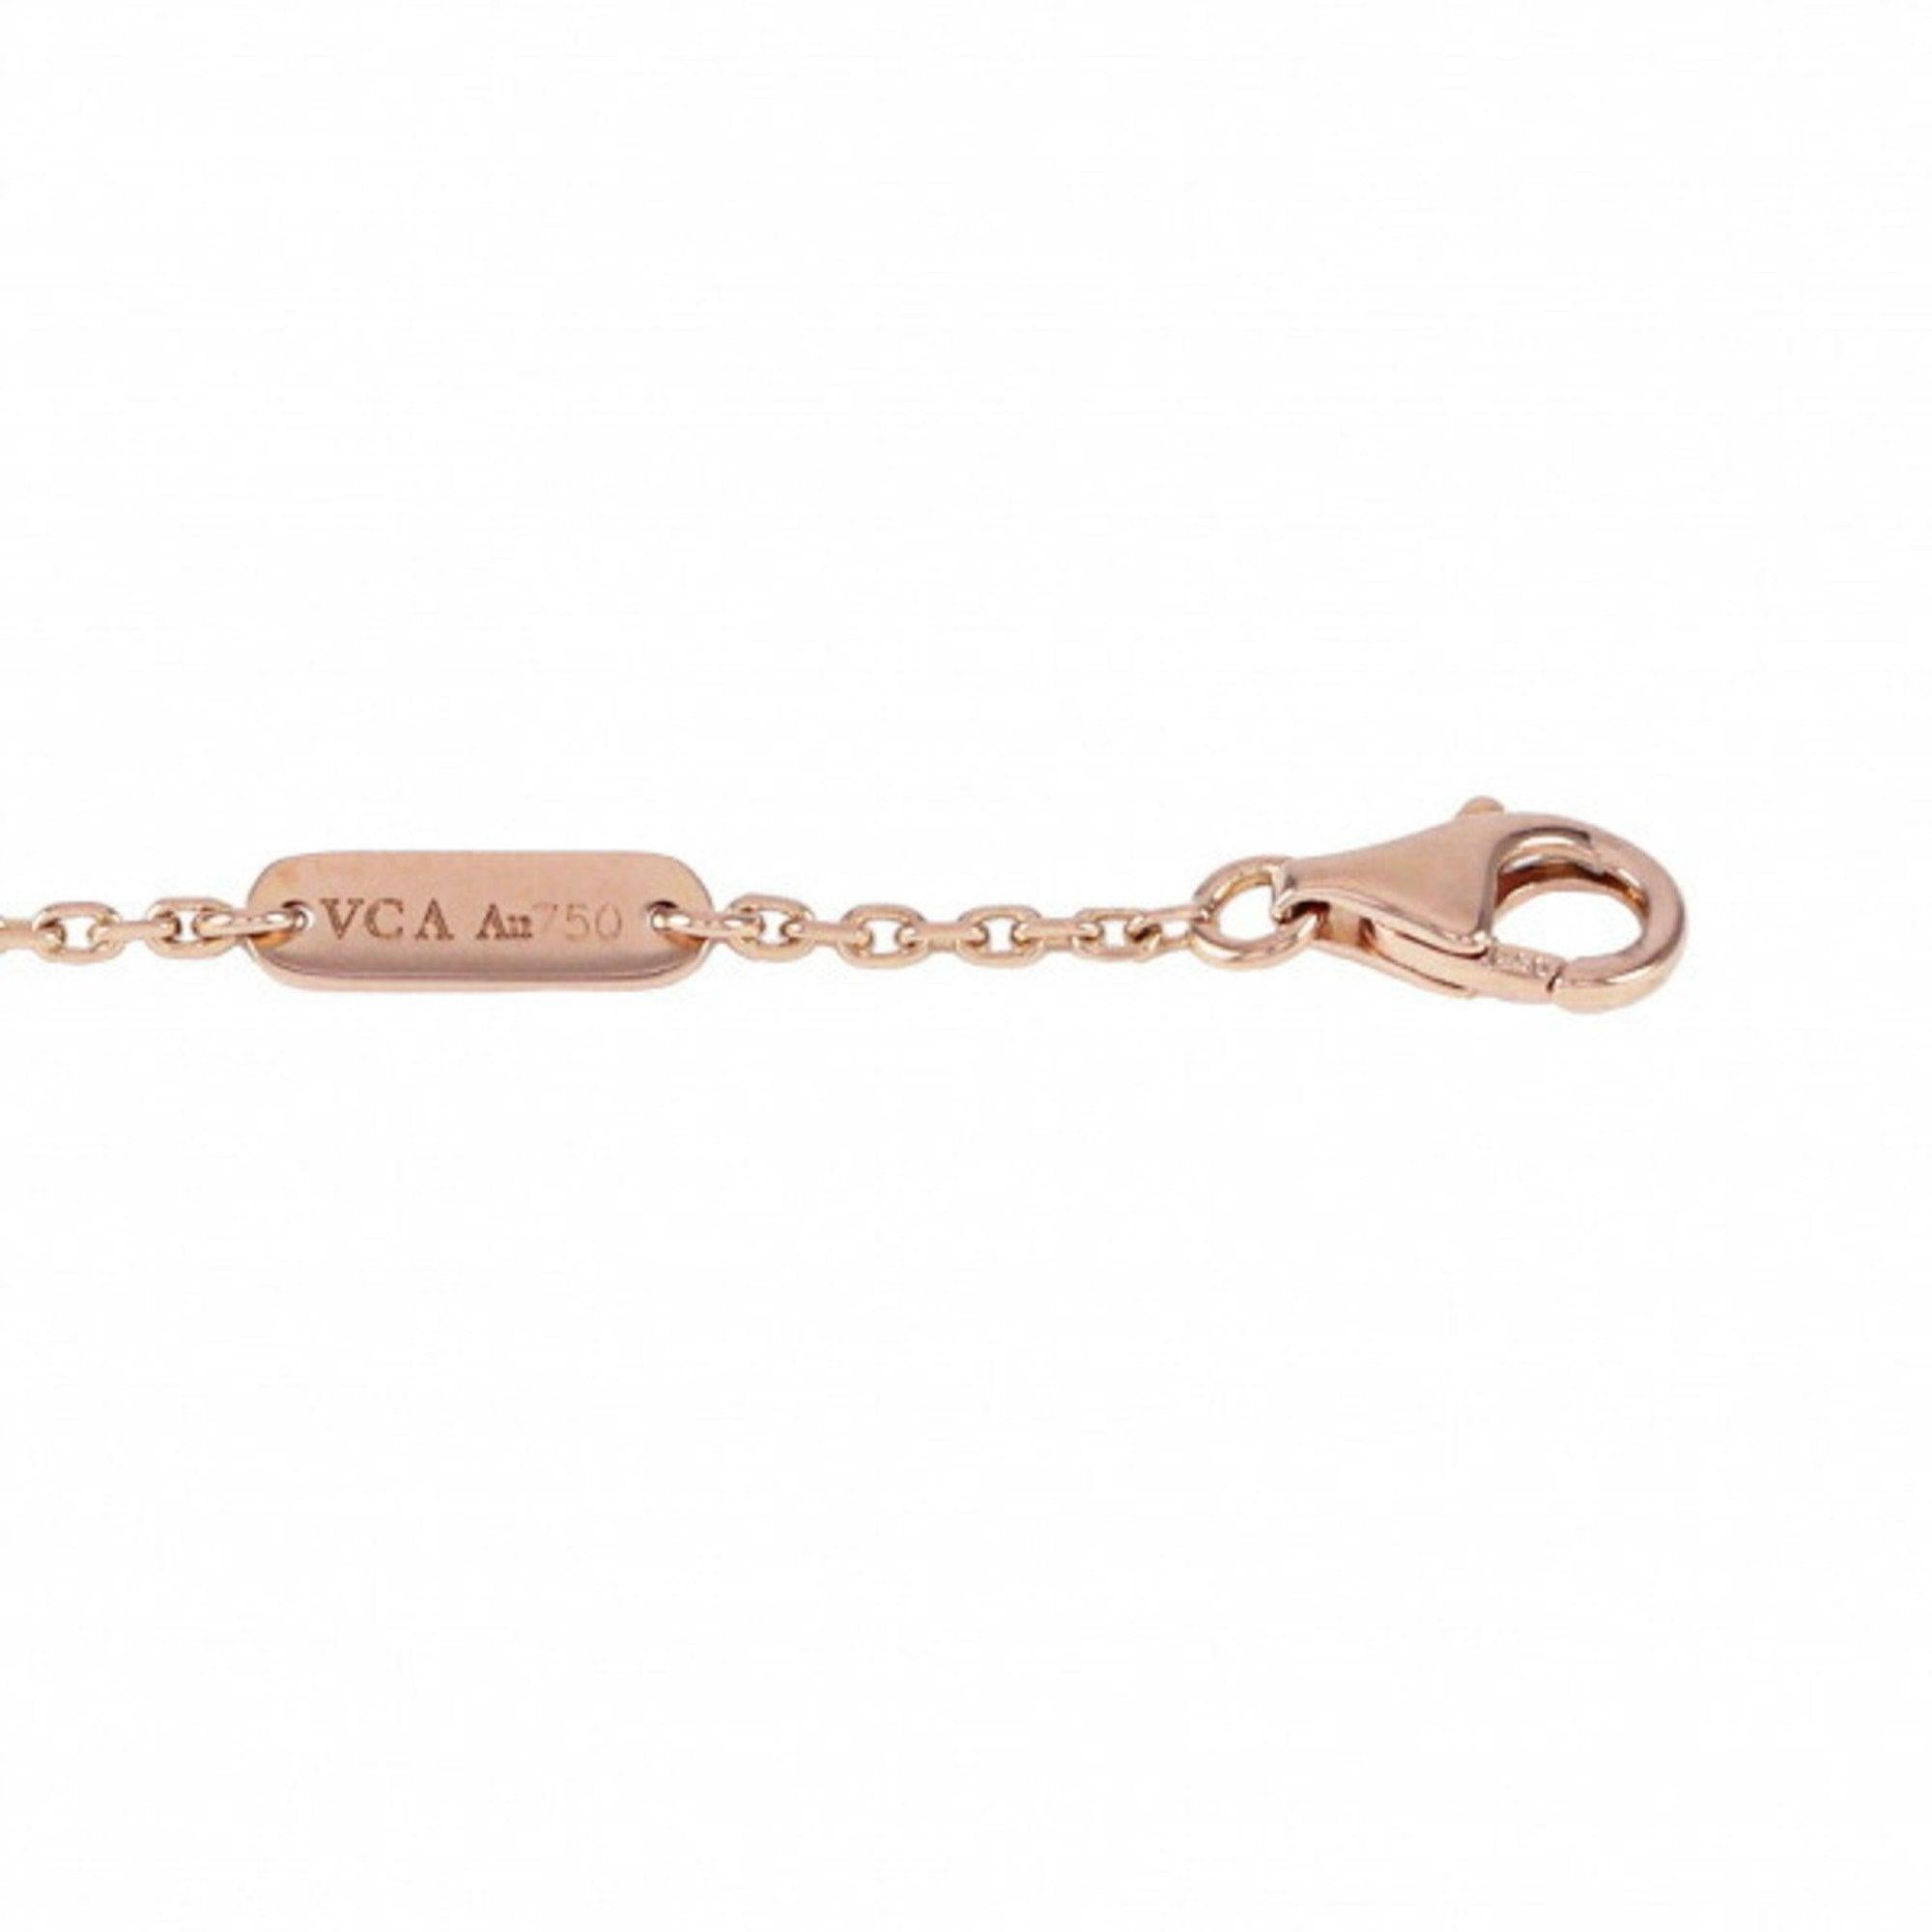 Van Cleef & Arpels Vintage Alhambra Pendant Necklace in 18K Pink Gold

Additional information:
Brand: Van Cleef & Arpels
Gender: Women
Line: Vintage Alhambra
Material: Pink gold (18K)
Condition: Good
Condition details: The item has been used and has